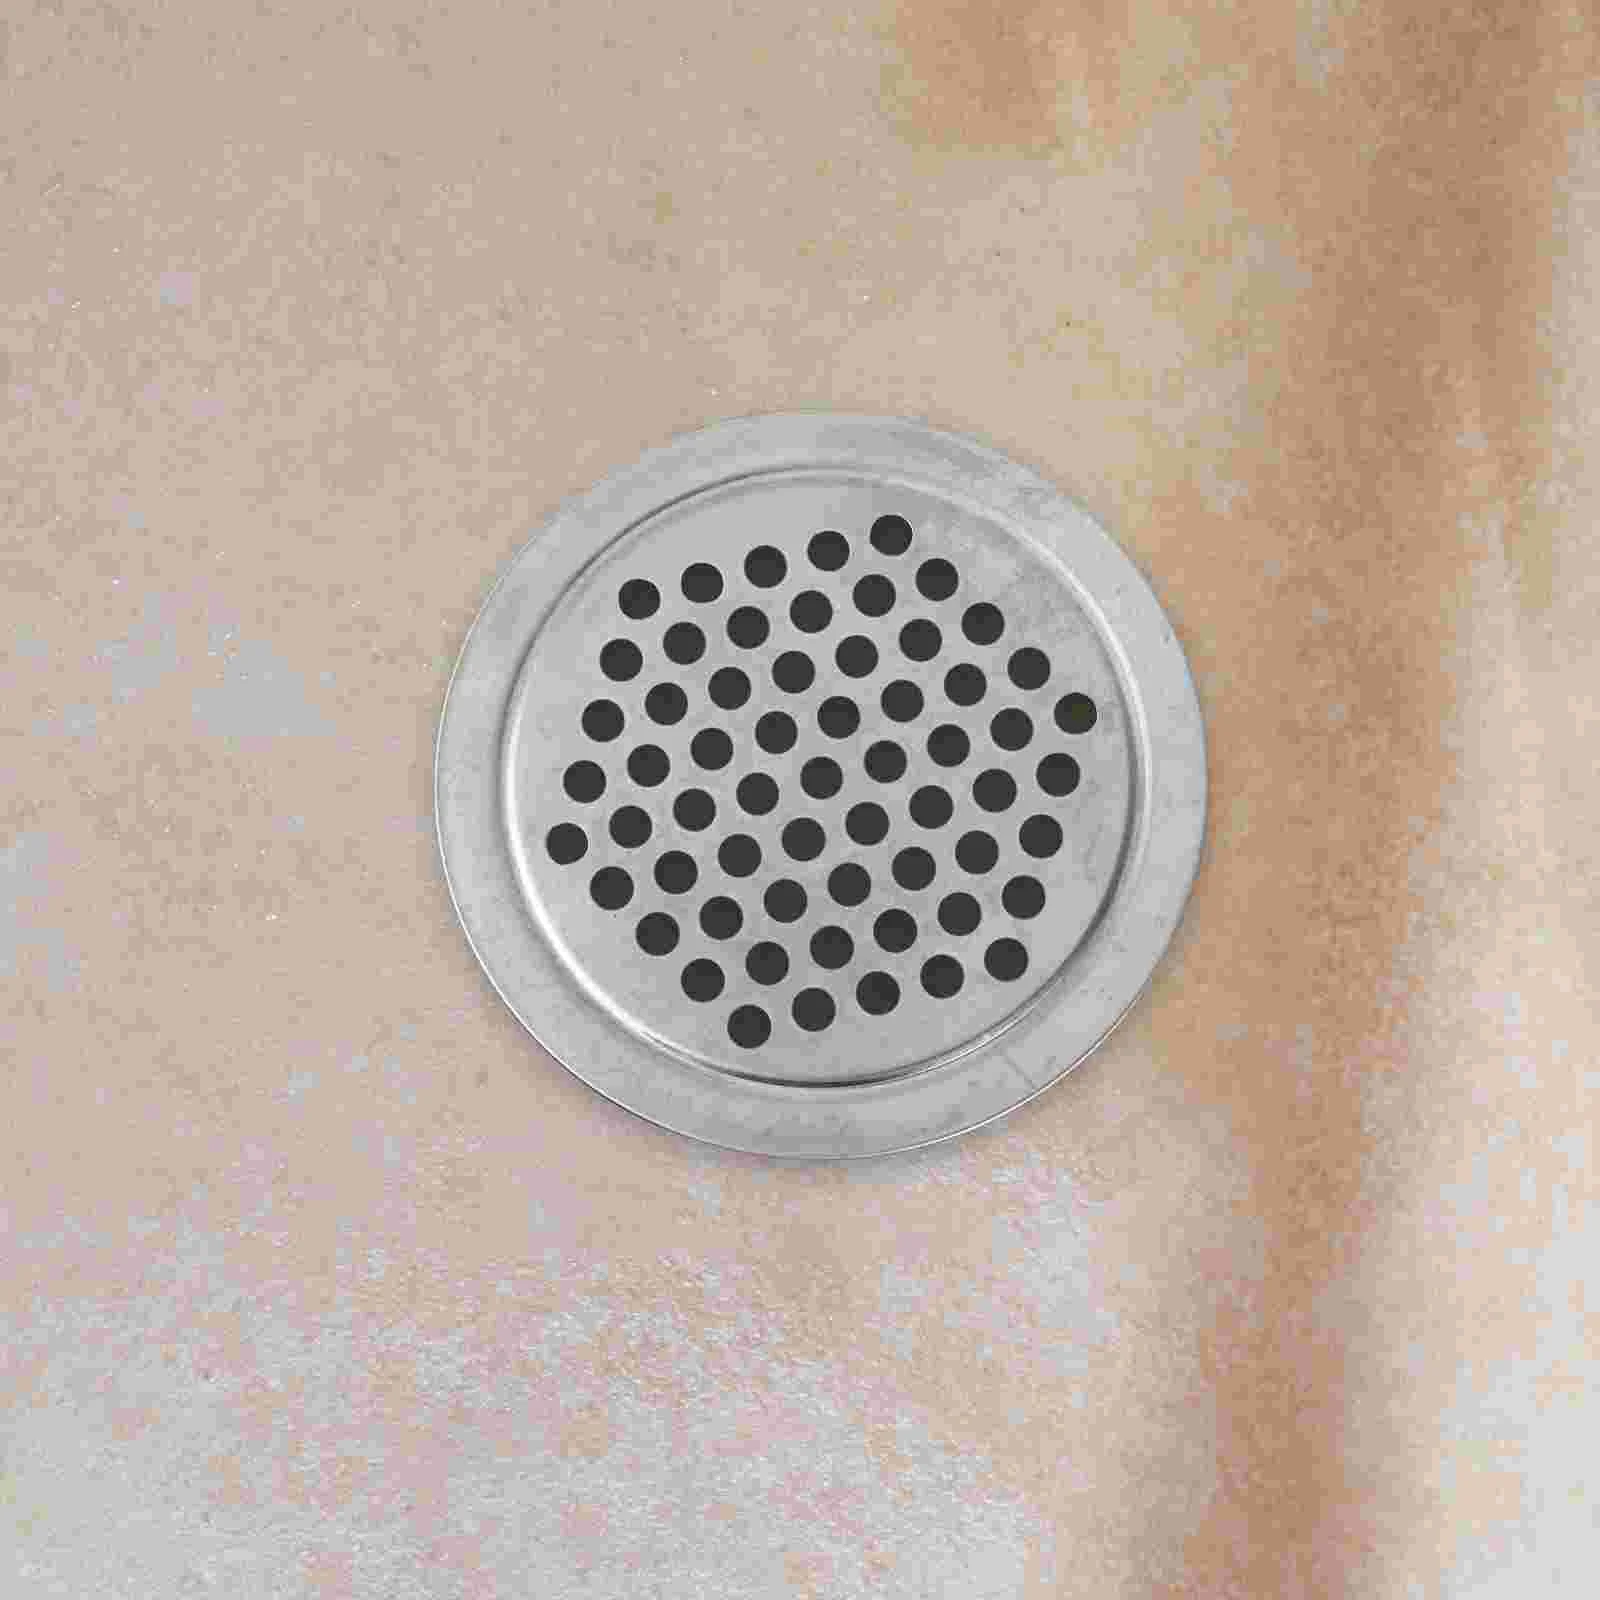 Pcs Vent Hole Durable Cabinet Ventilation Stainless Steel Air Vent Hole Round Vent Cover for Shoe Cabinets Cabinets